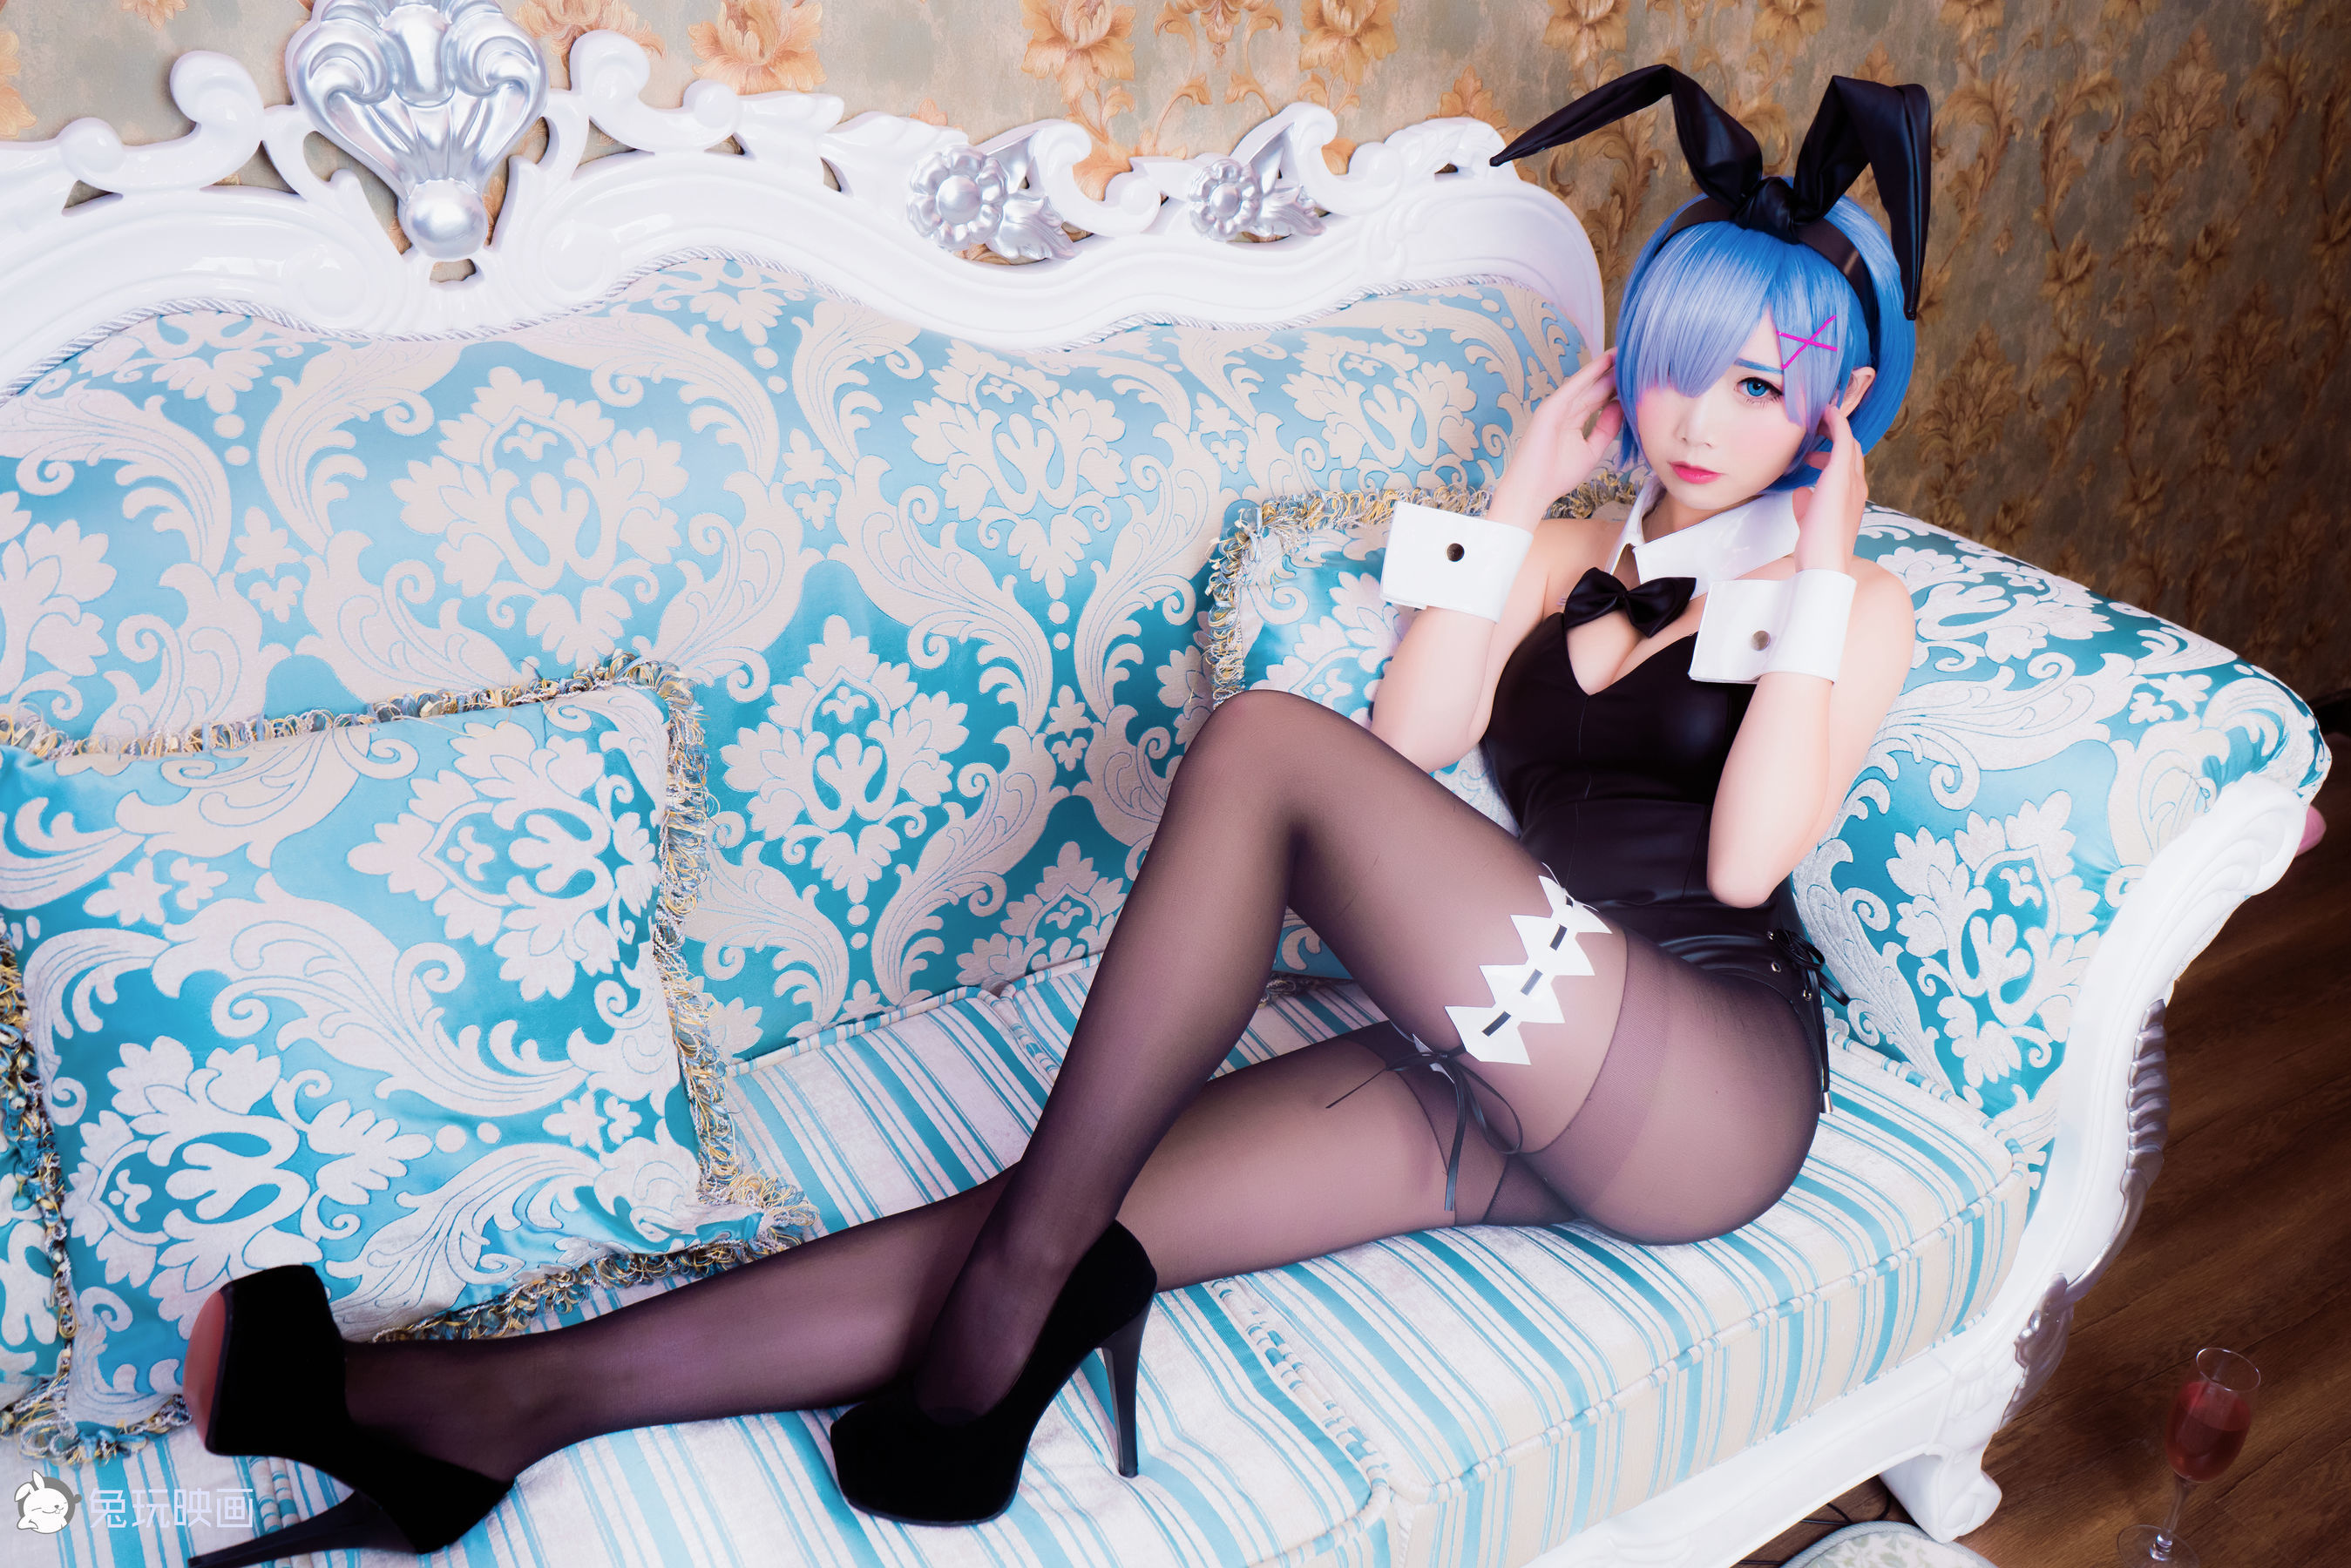 Bunny suit cosplay teen snapchat compilations